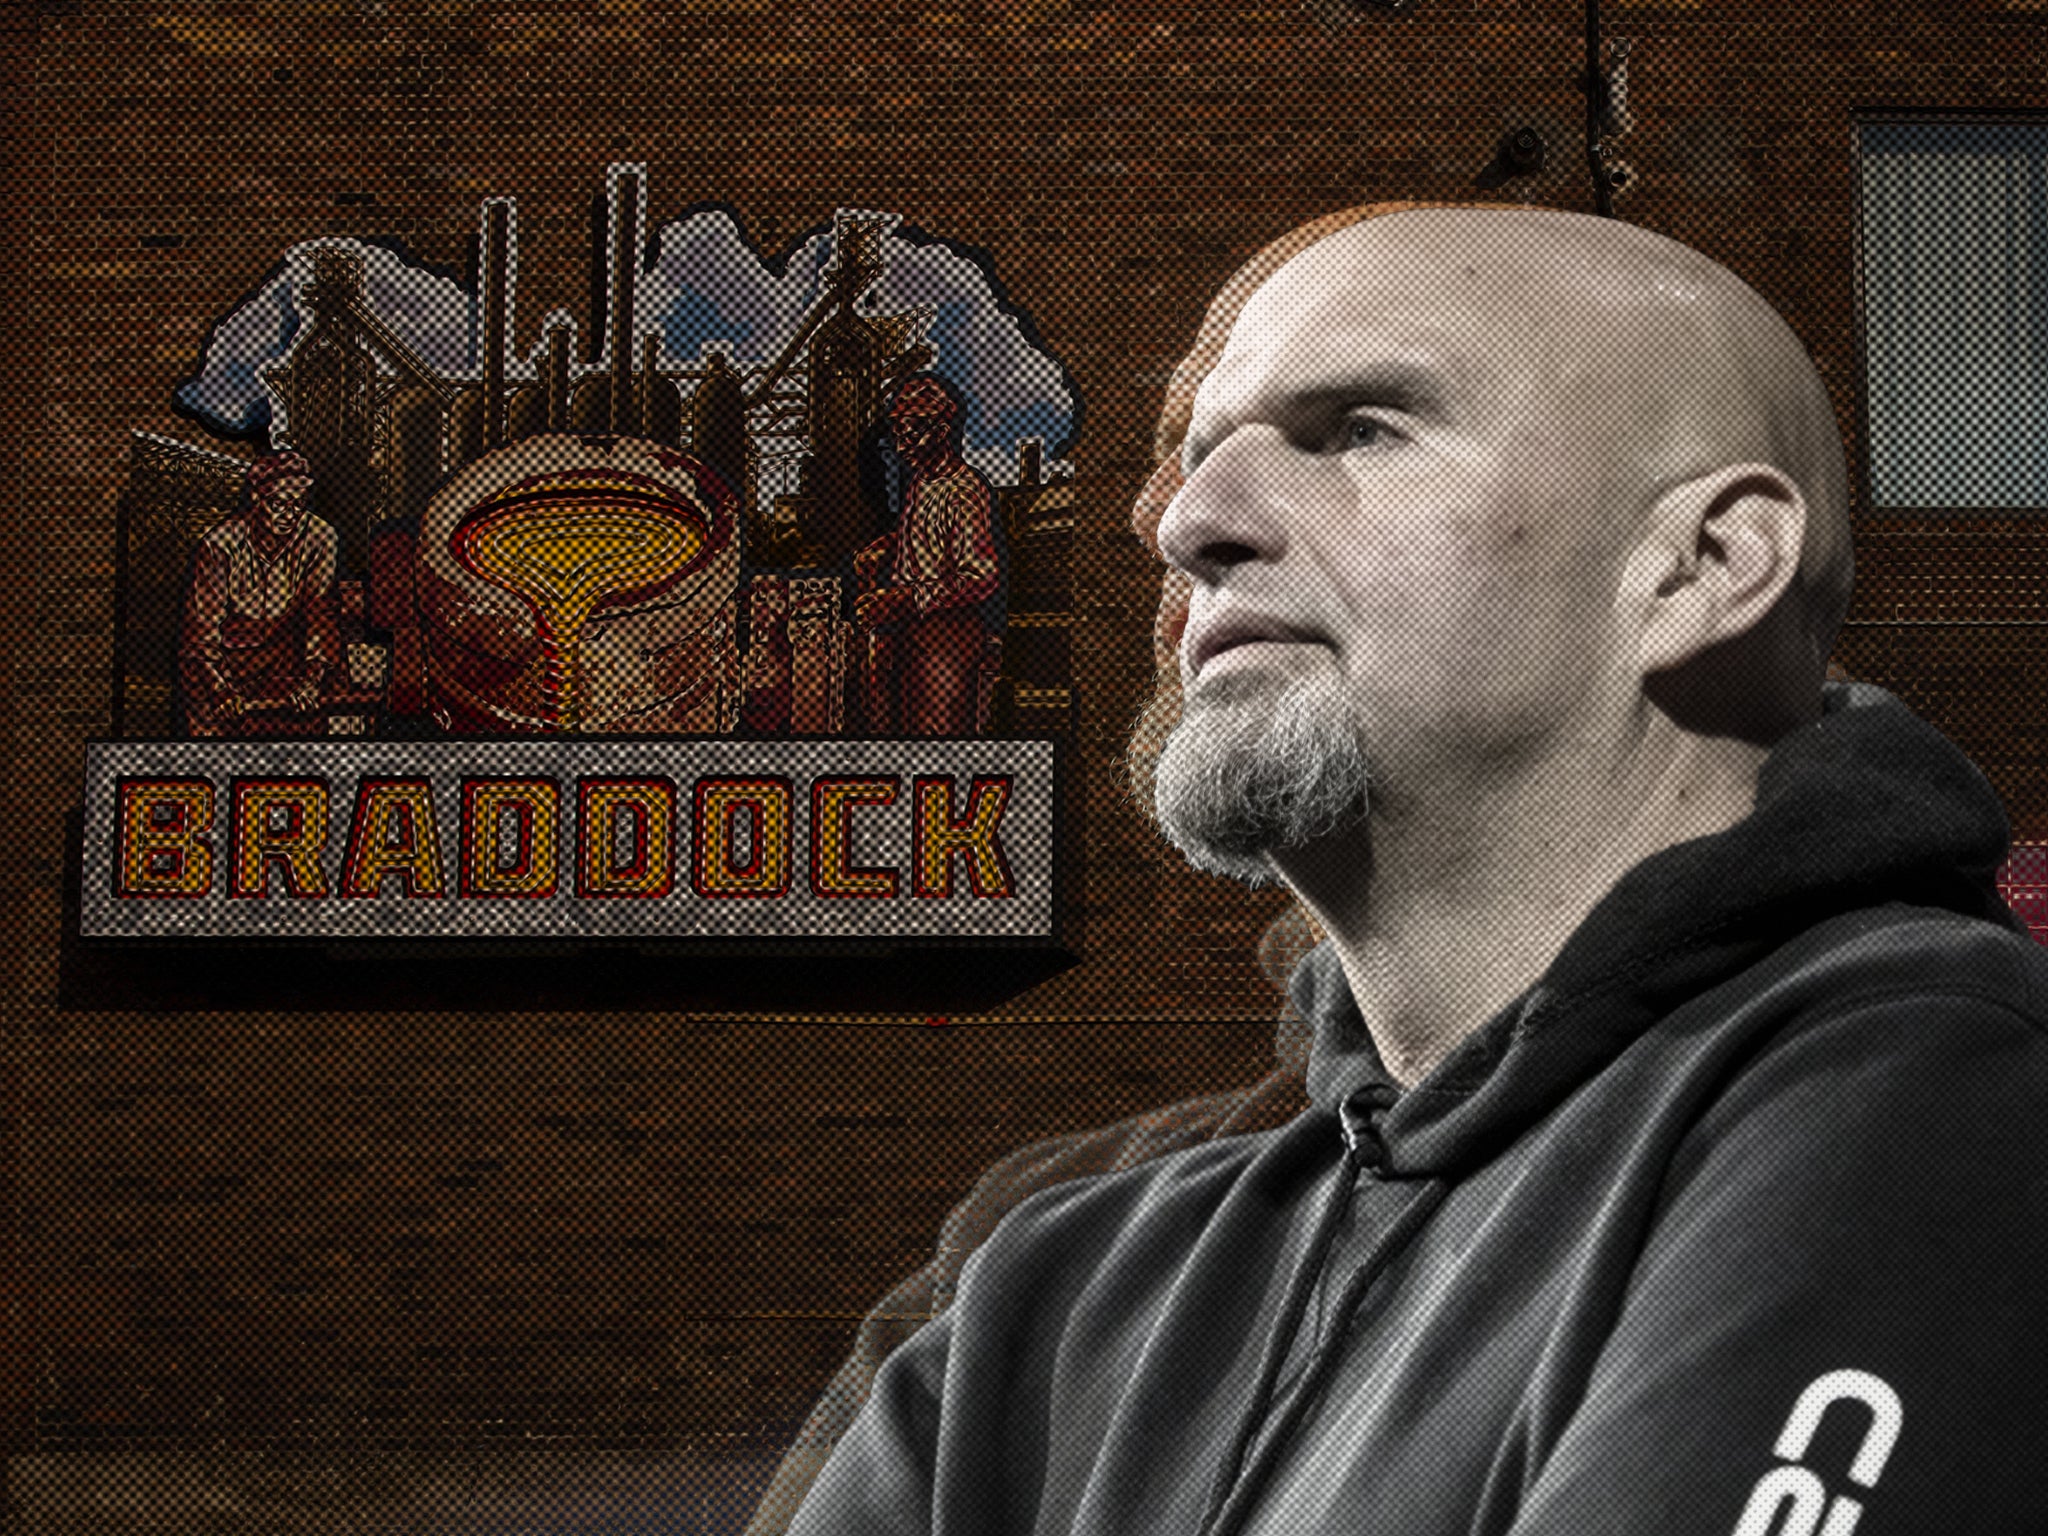 Braddock, the town that made John Fetterman, speaks on his run for Senate:  'Our town got a battery jolt' | The Independent